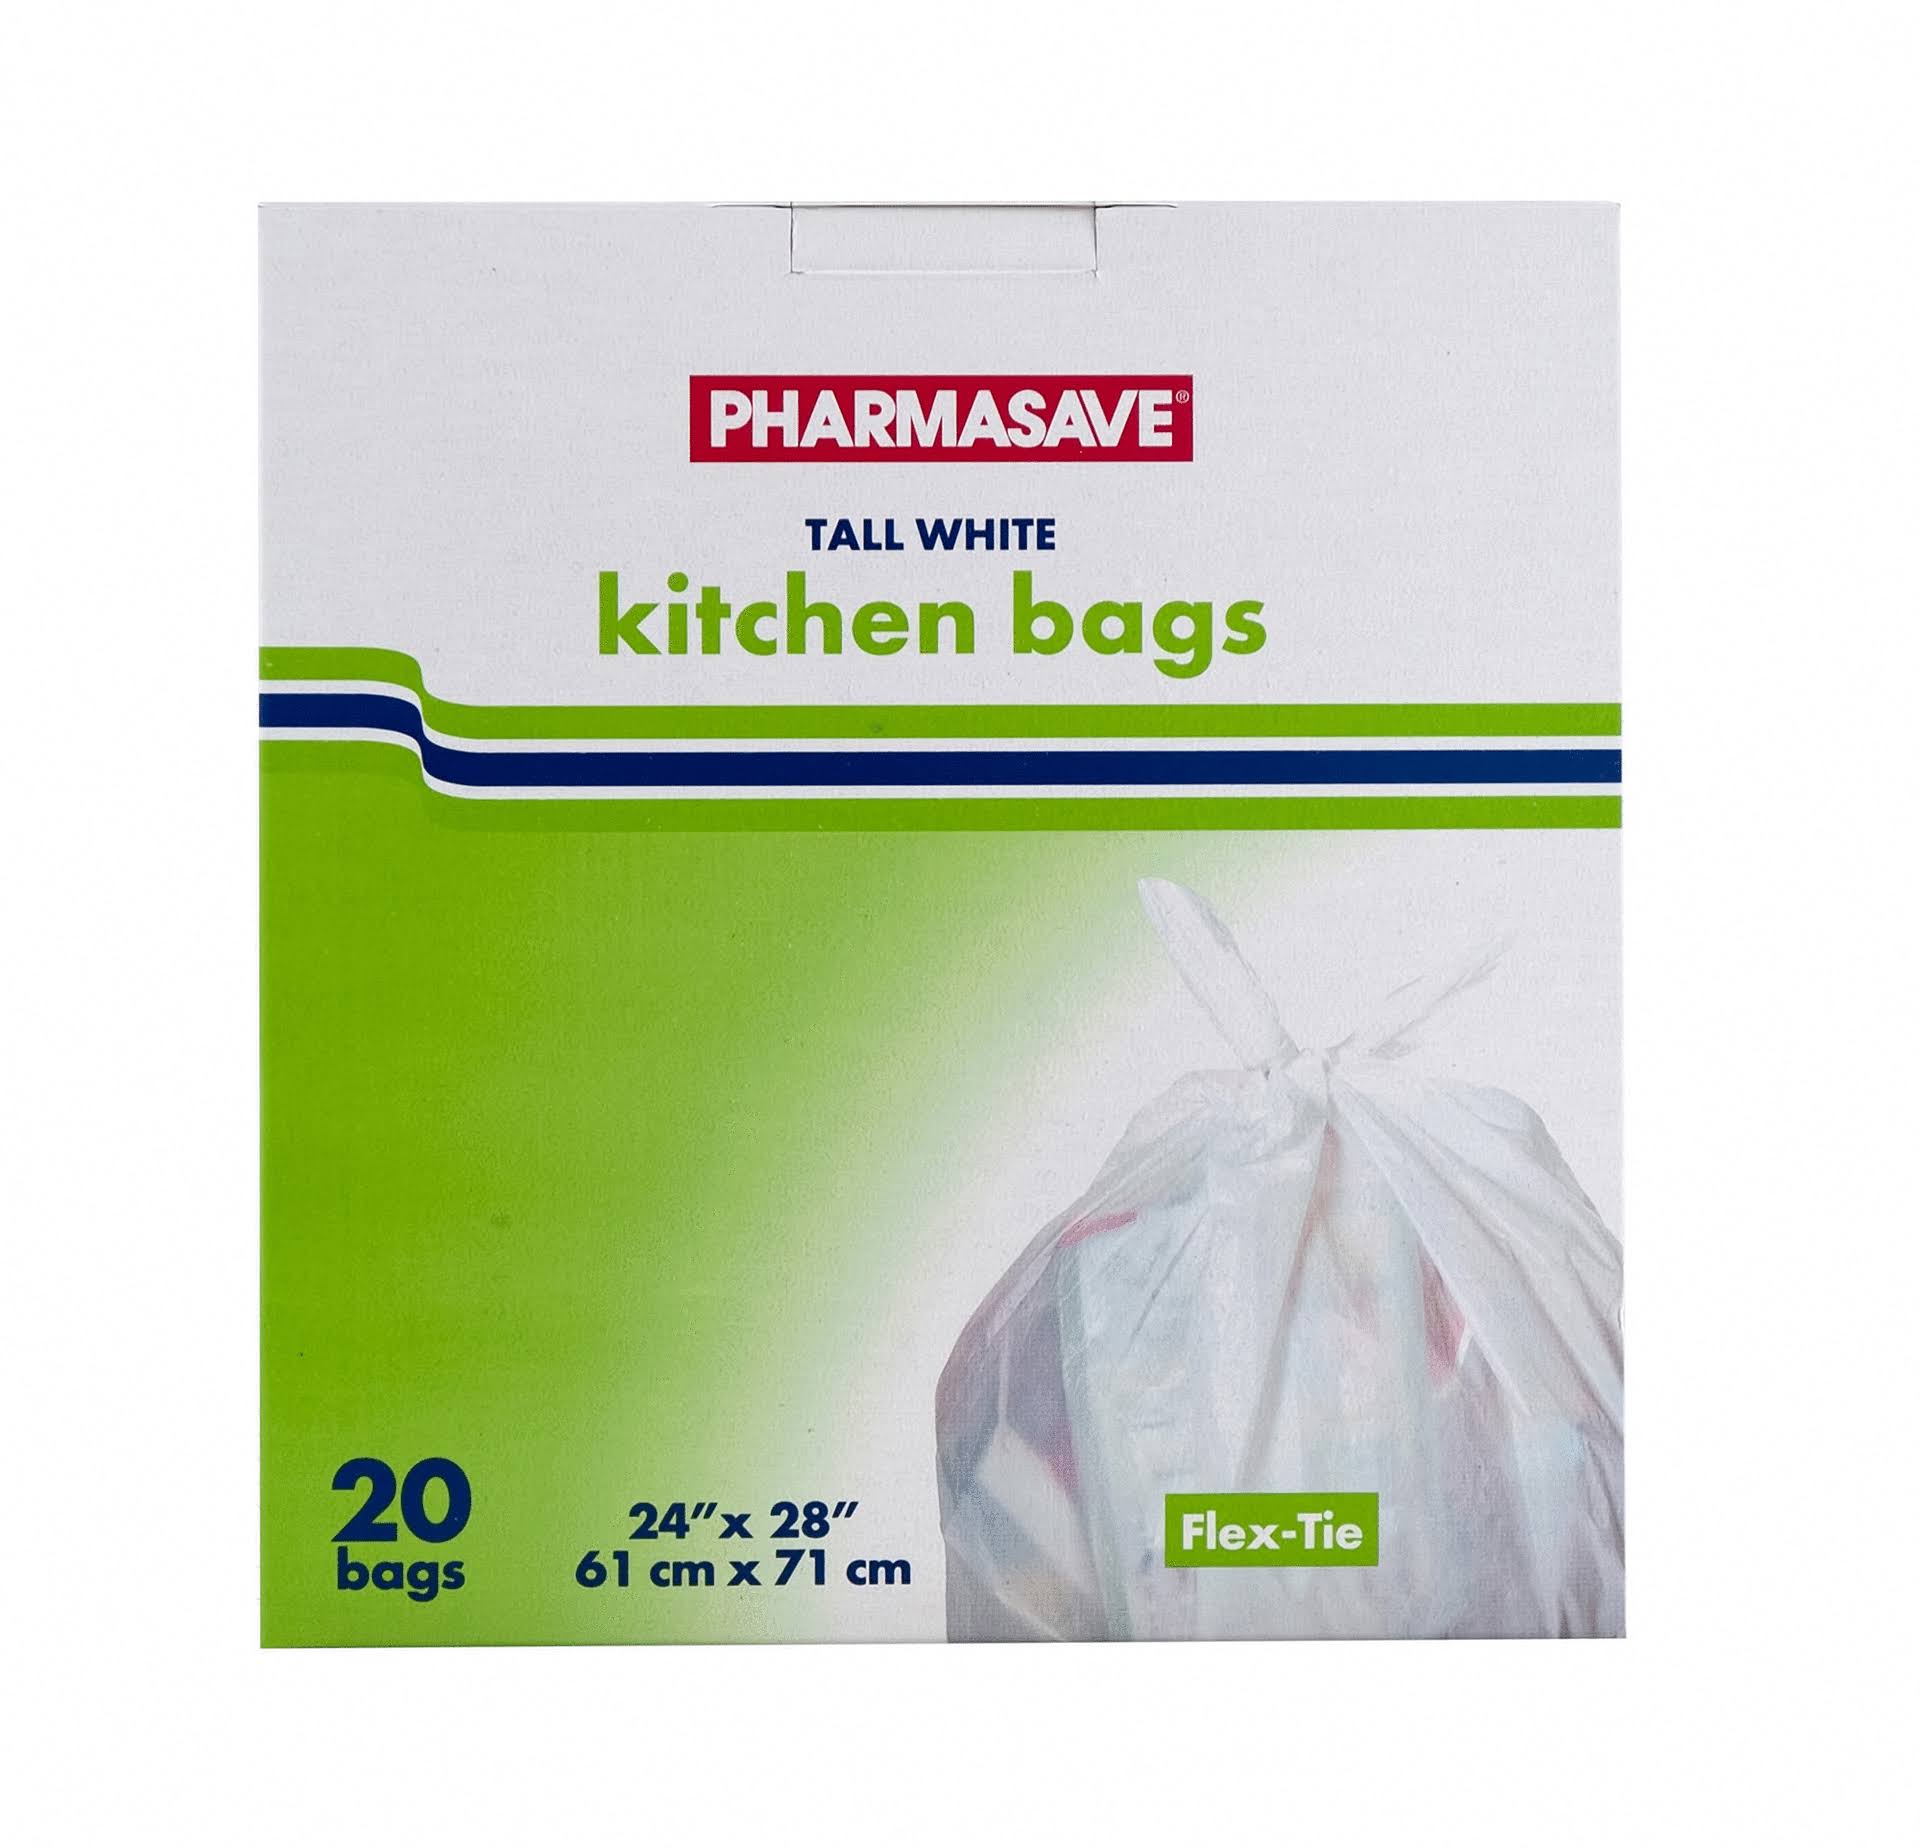 PHARMASAVE TALL White KITCHEN BAGS 20S